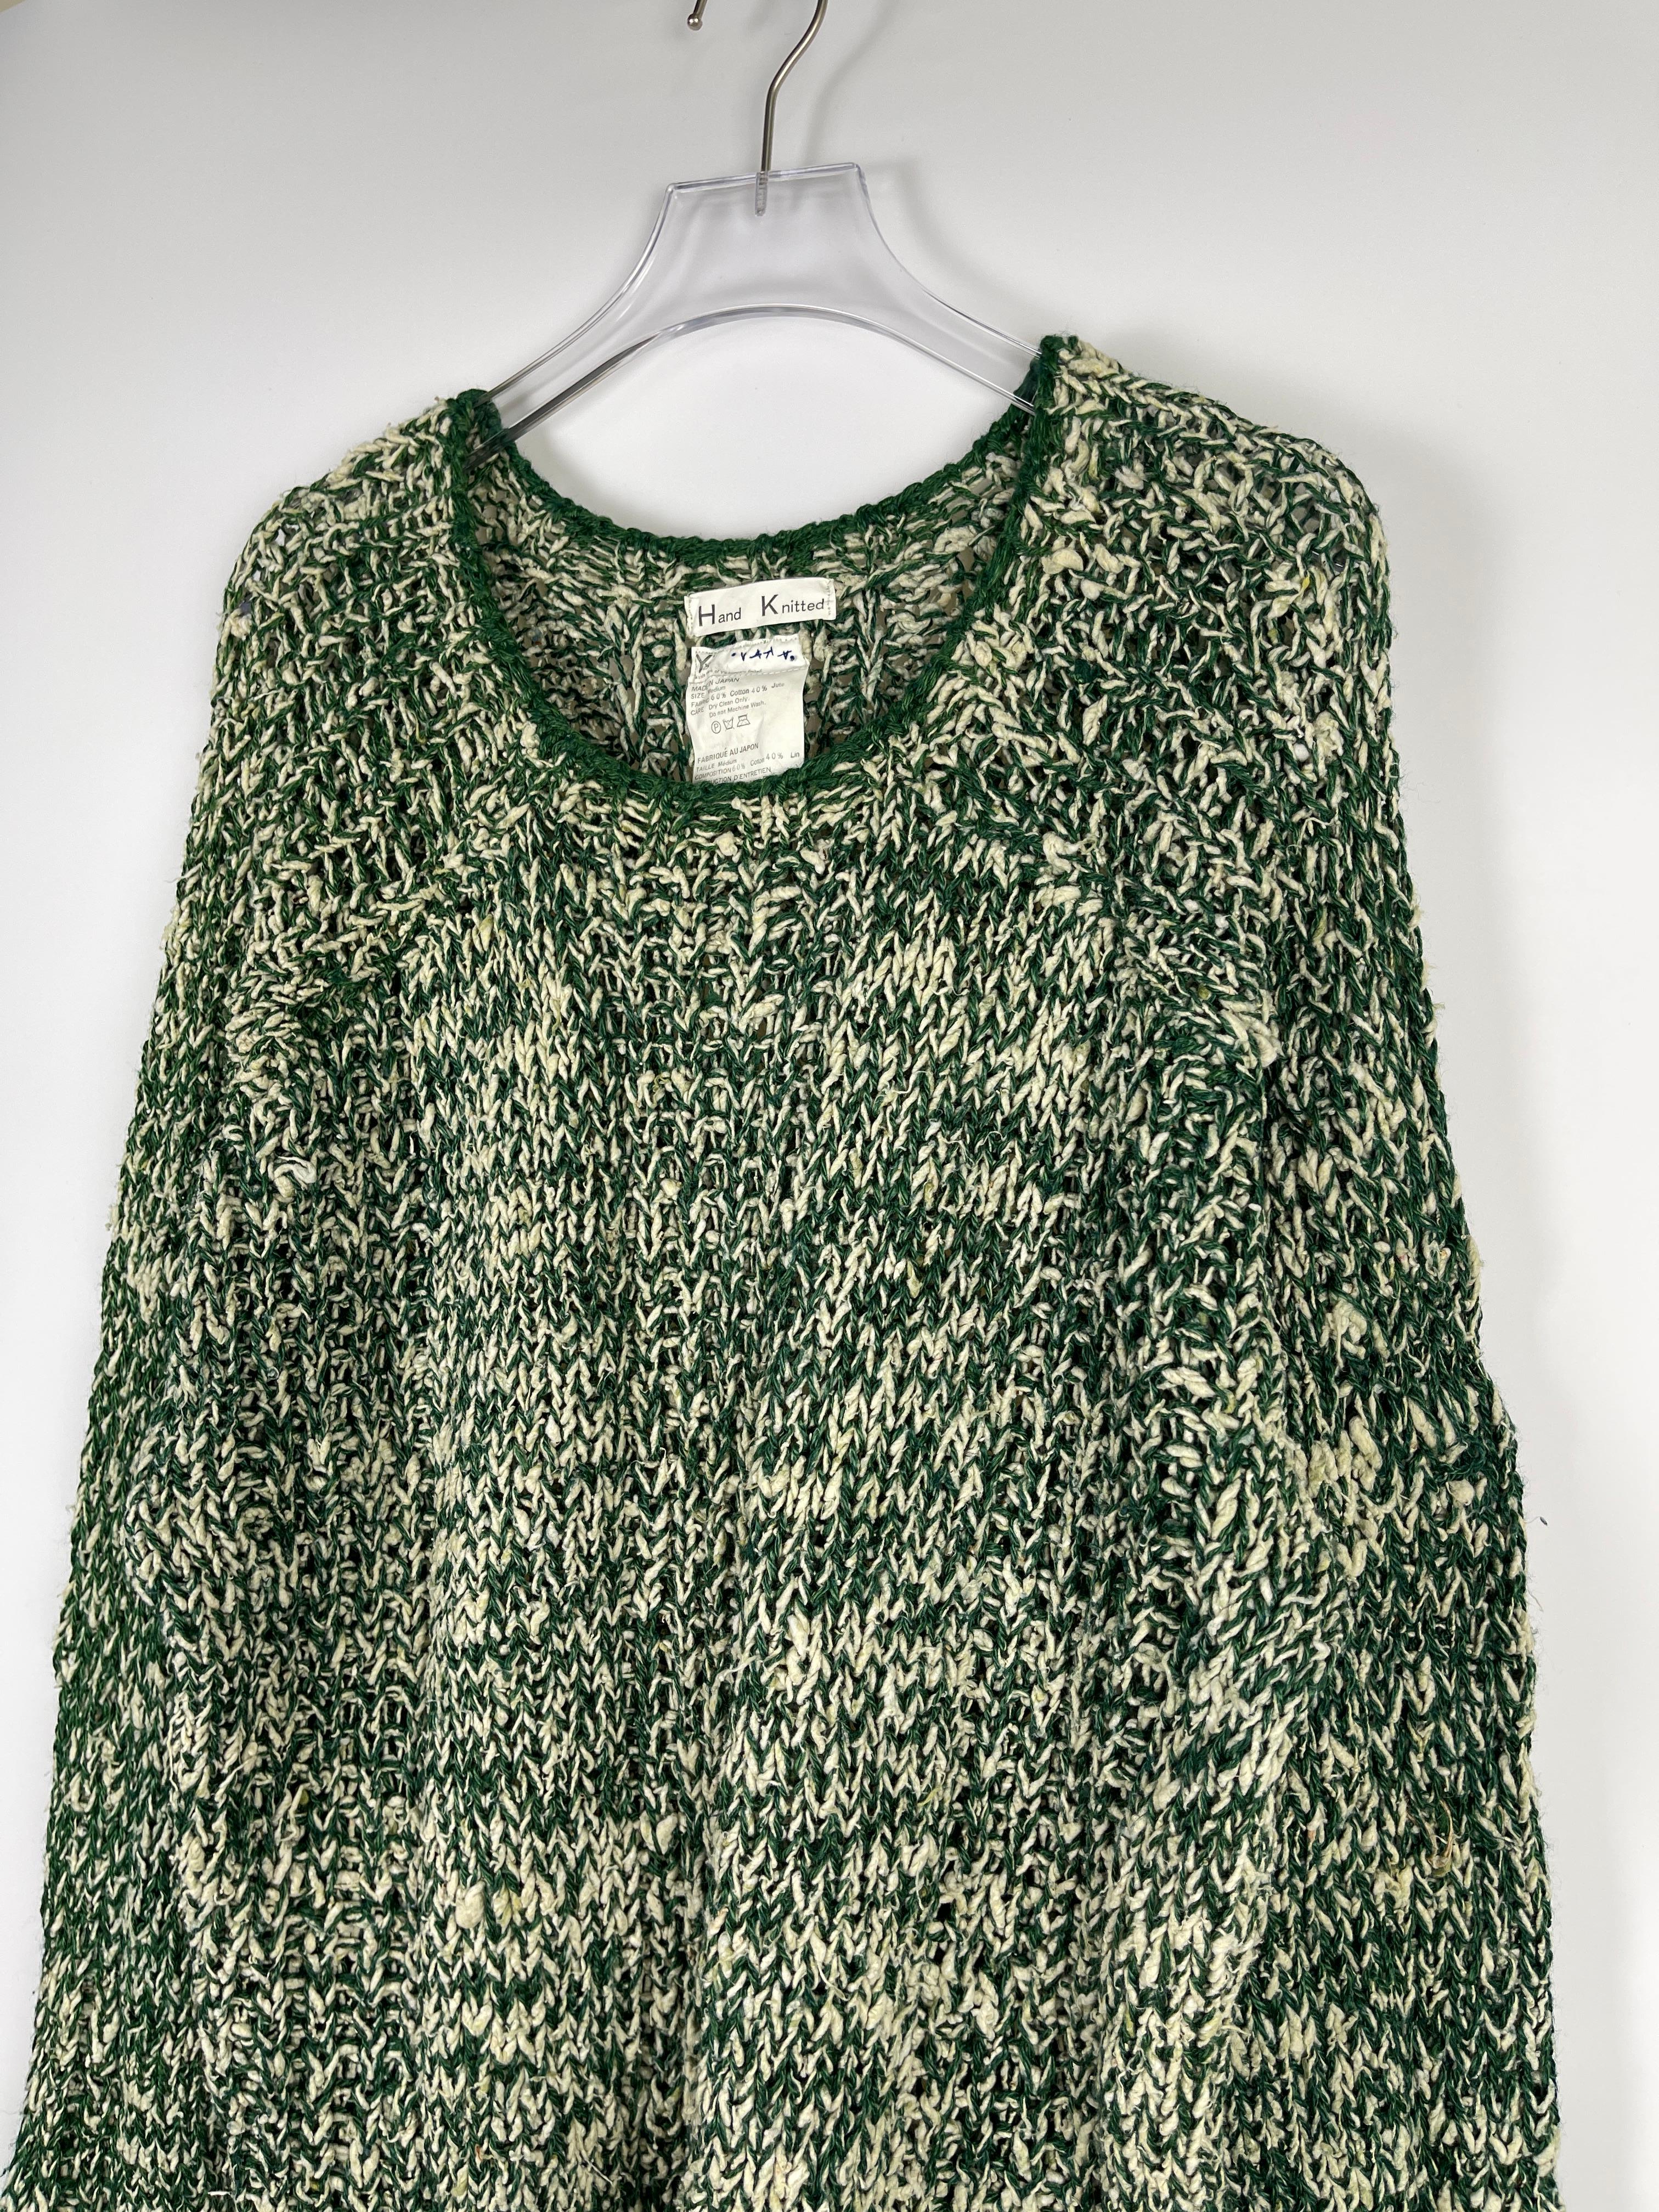 Yohji Yamamoto Y's For Men 1980's Hand-Knitted Sweater In Excellent Condition For Sale In Seattle, WA